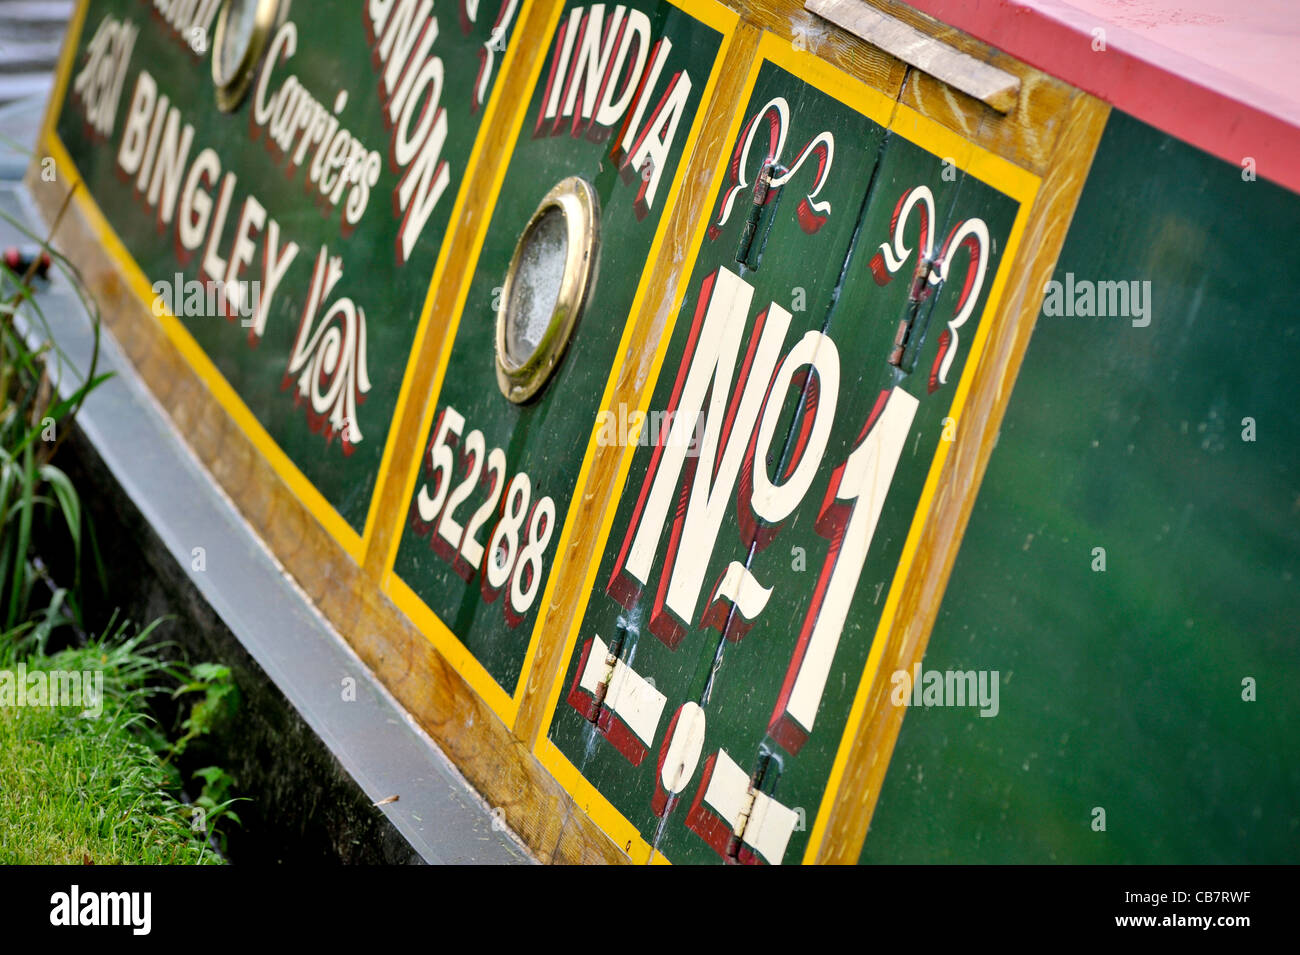 No1 on the side of a canal boat on the Leeds Liverpool canal, near Skipton, Yorkshire, UK. Stock Photo